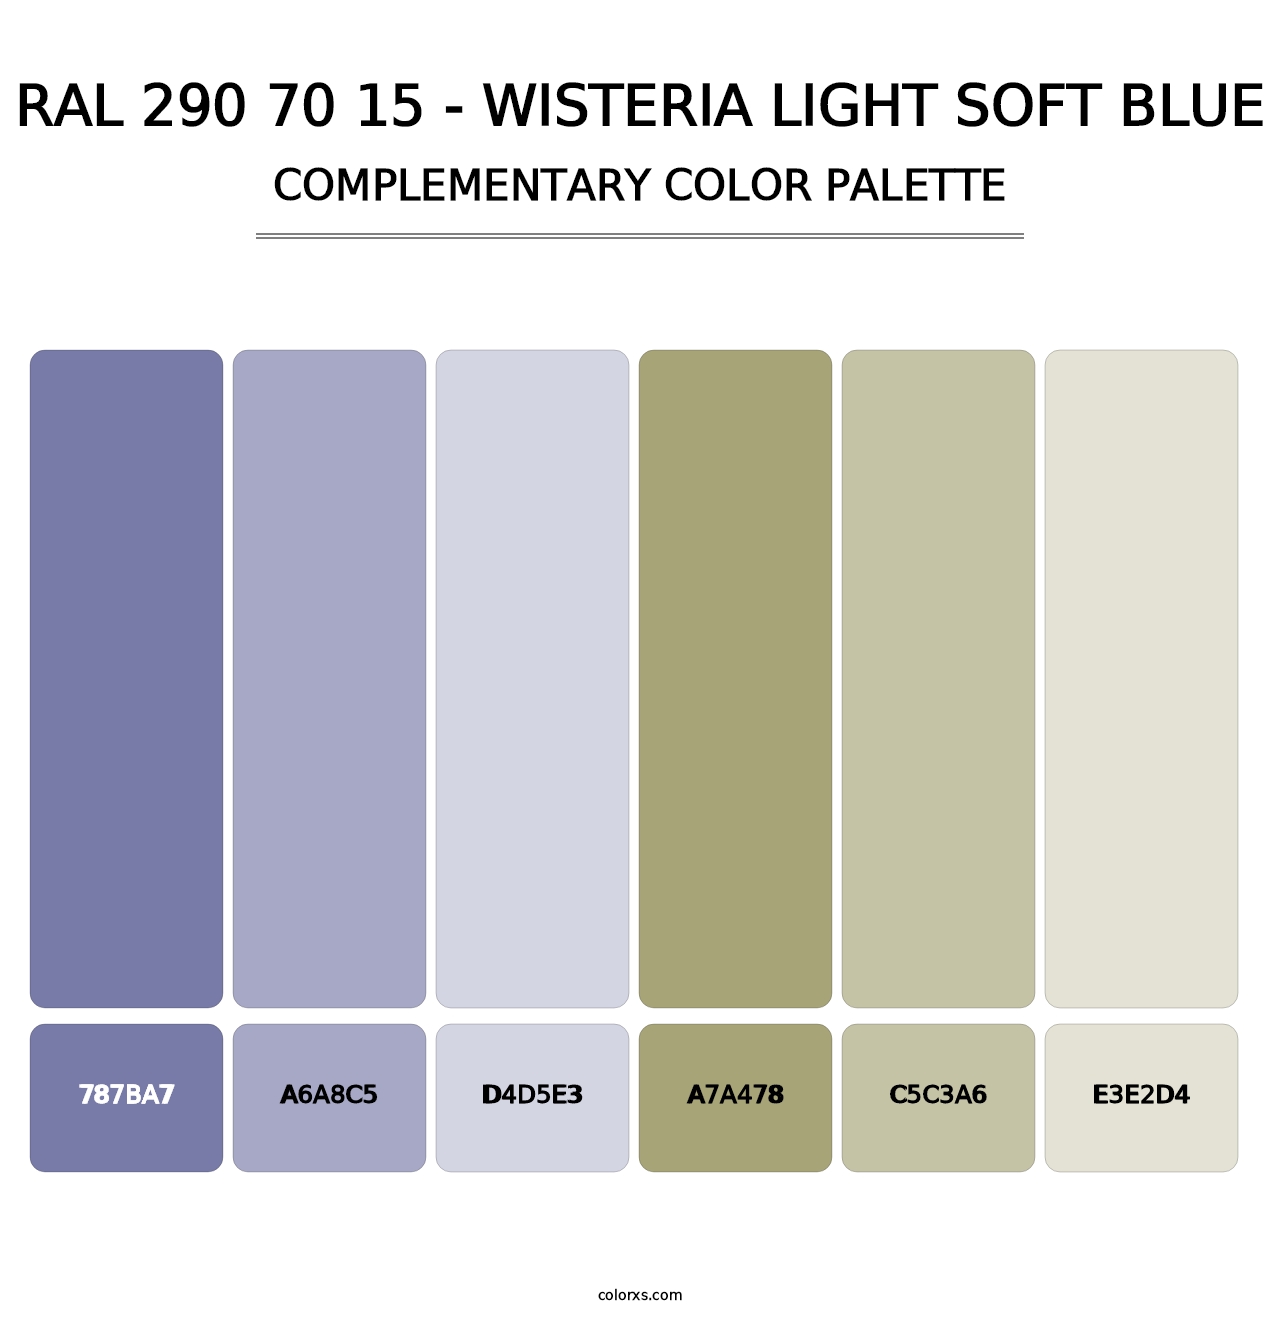 RAL 290 70 15 - Wisteria Light Soft Blue - Complementary Color Palette